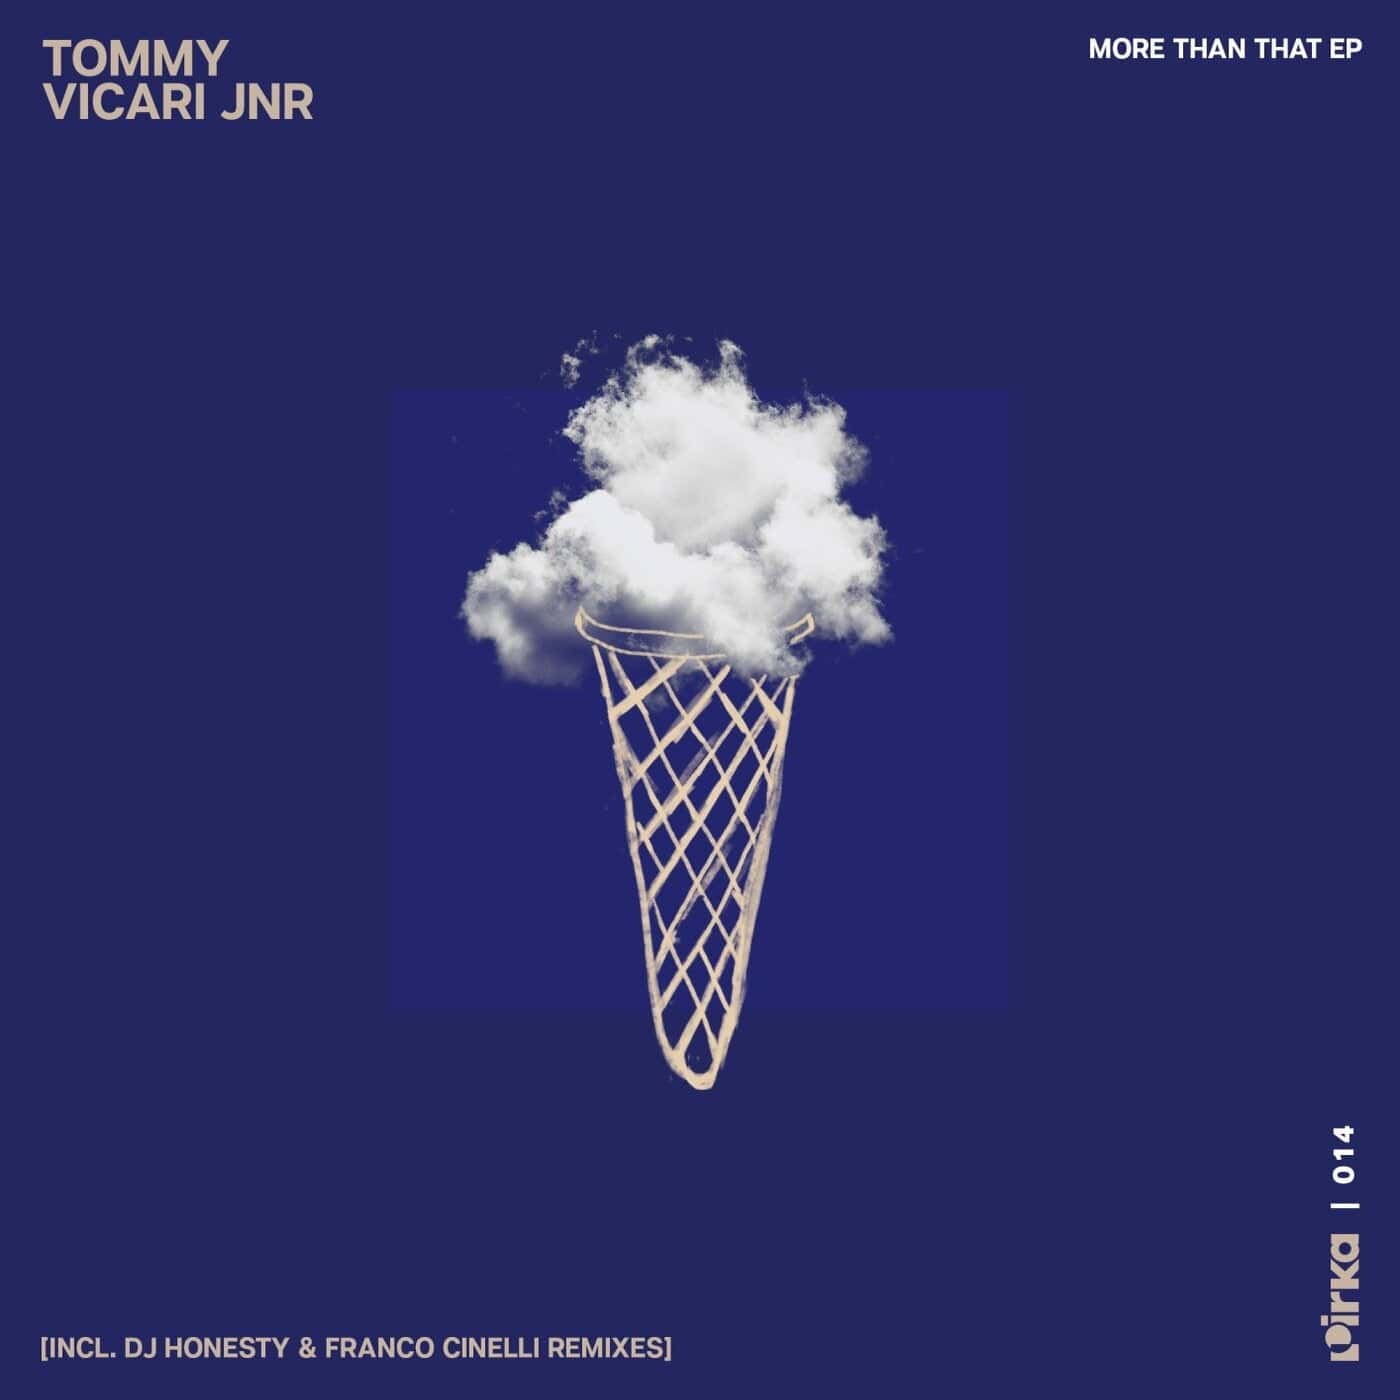 image cover: Tommy Vicari Jnr - More Than That EP / PRK014